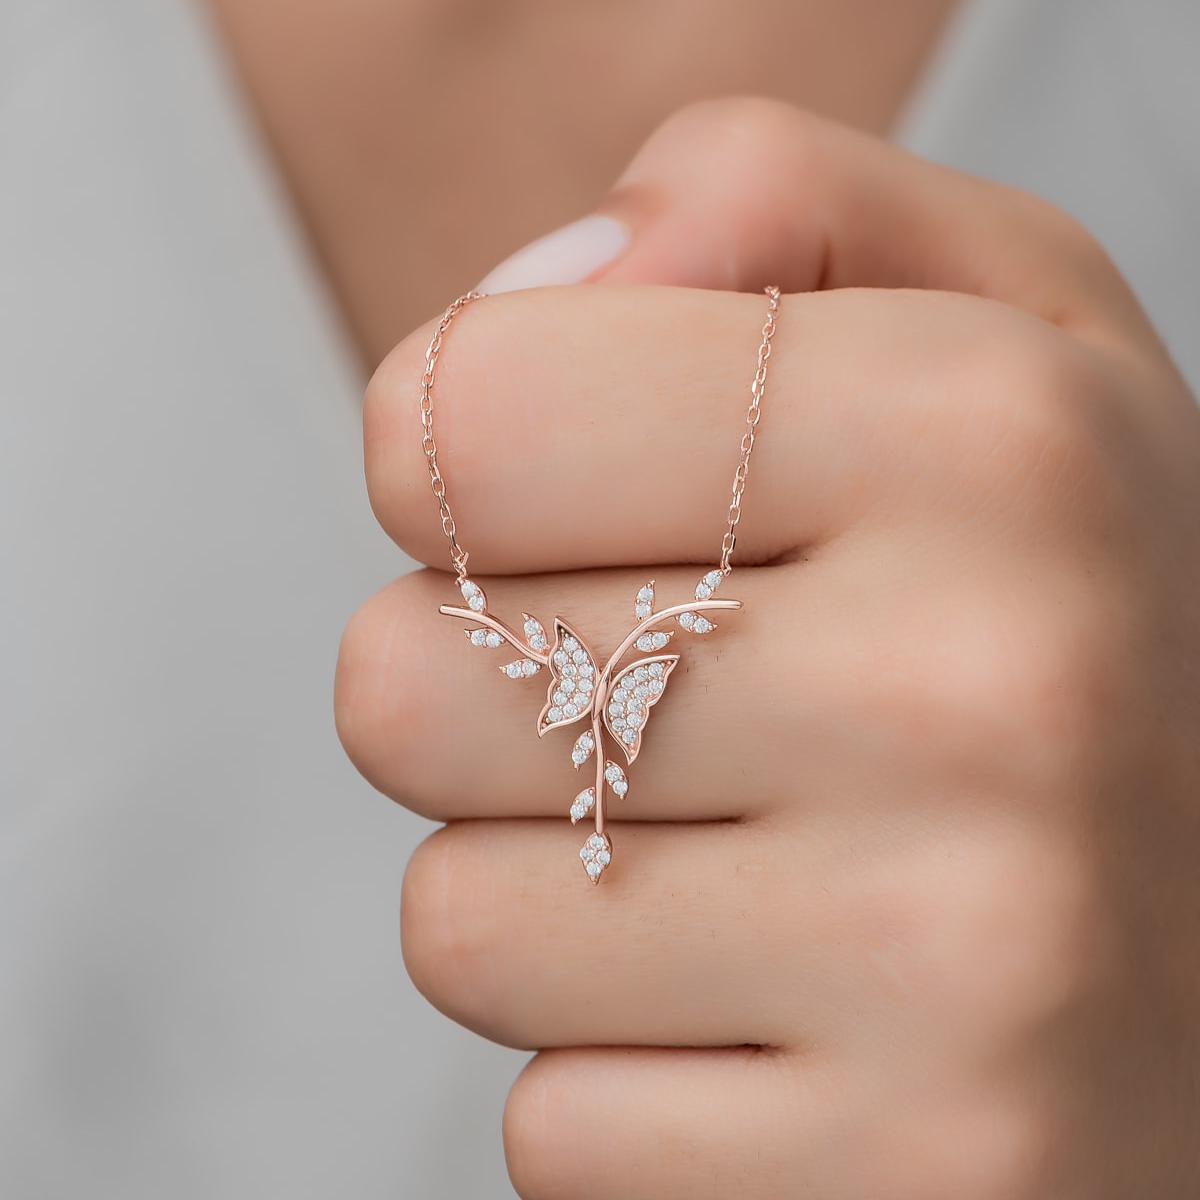 Diamond Butterfly Ivy Necklace • Butterfly Ivy Necklace Pendant - Trending Silver Gifts